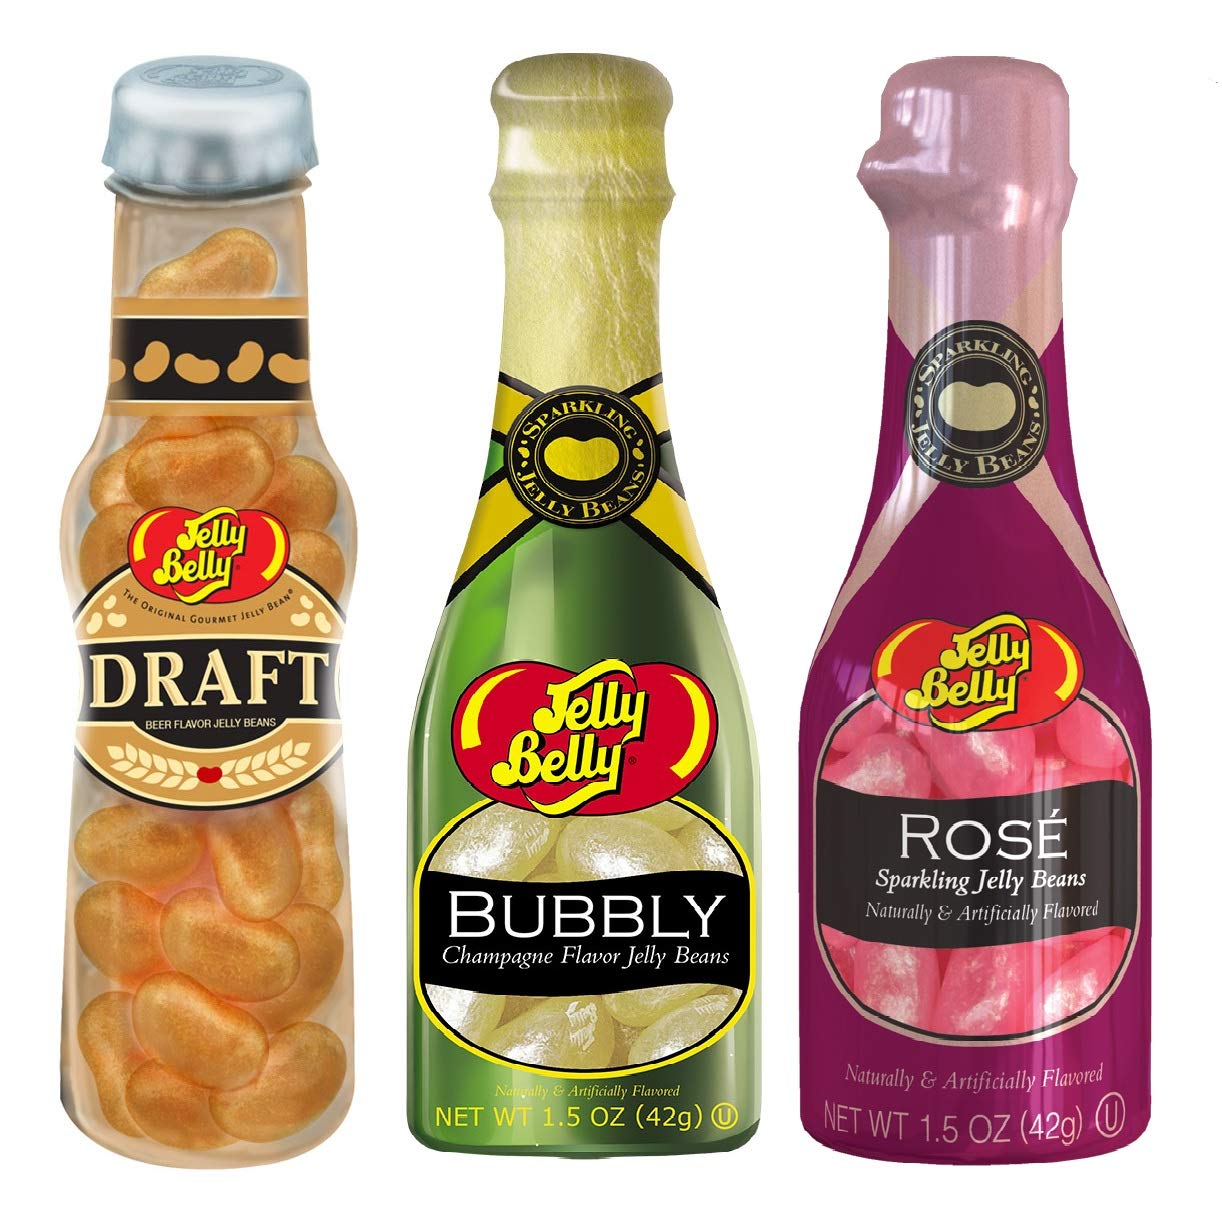 Jelly Bean Cheers 3-Pack of Mini Bottles - Beer, Champage & Rose Wine, 1.5 Oz Each (Great Party Favors or Shower Gifts)